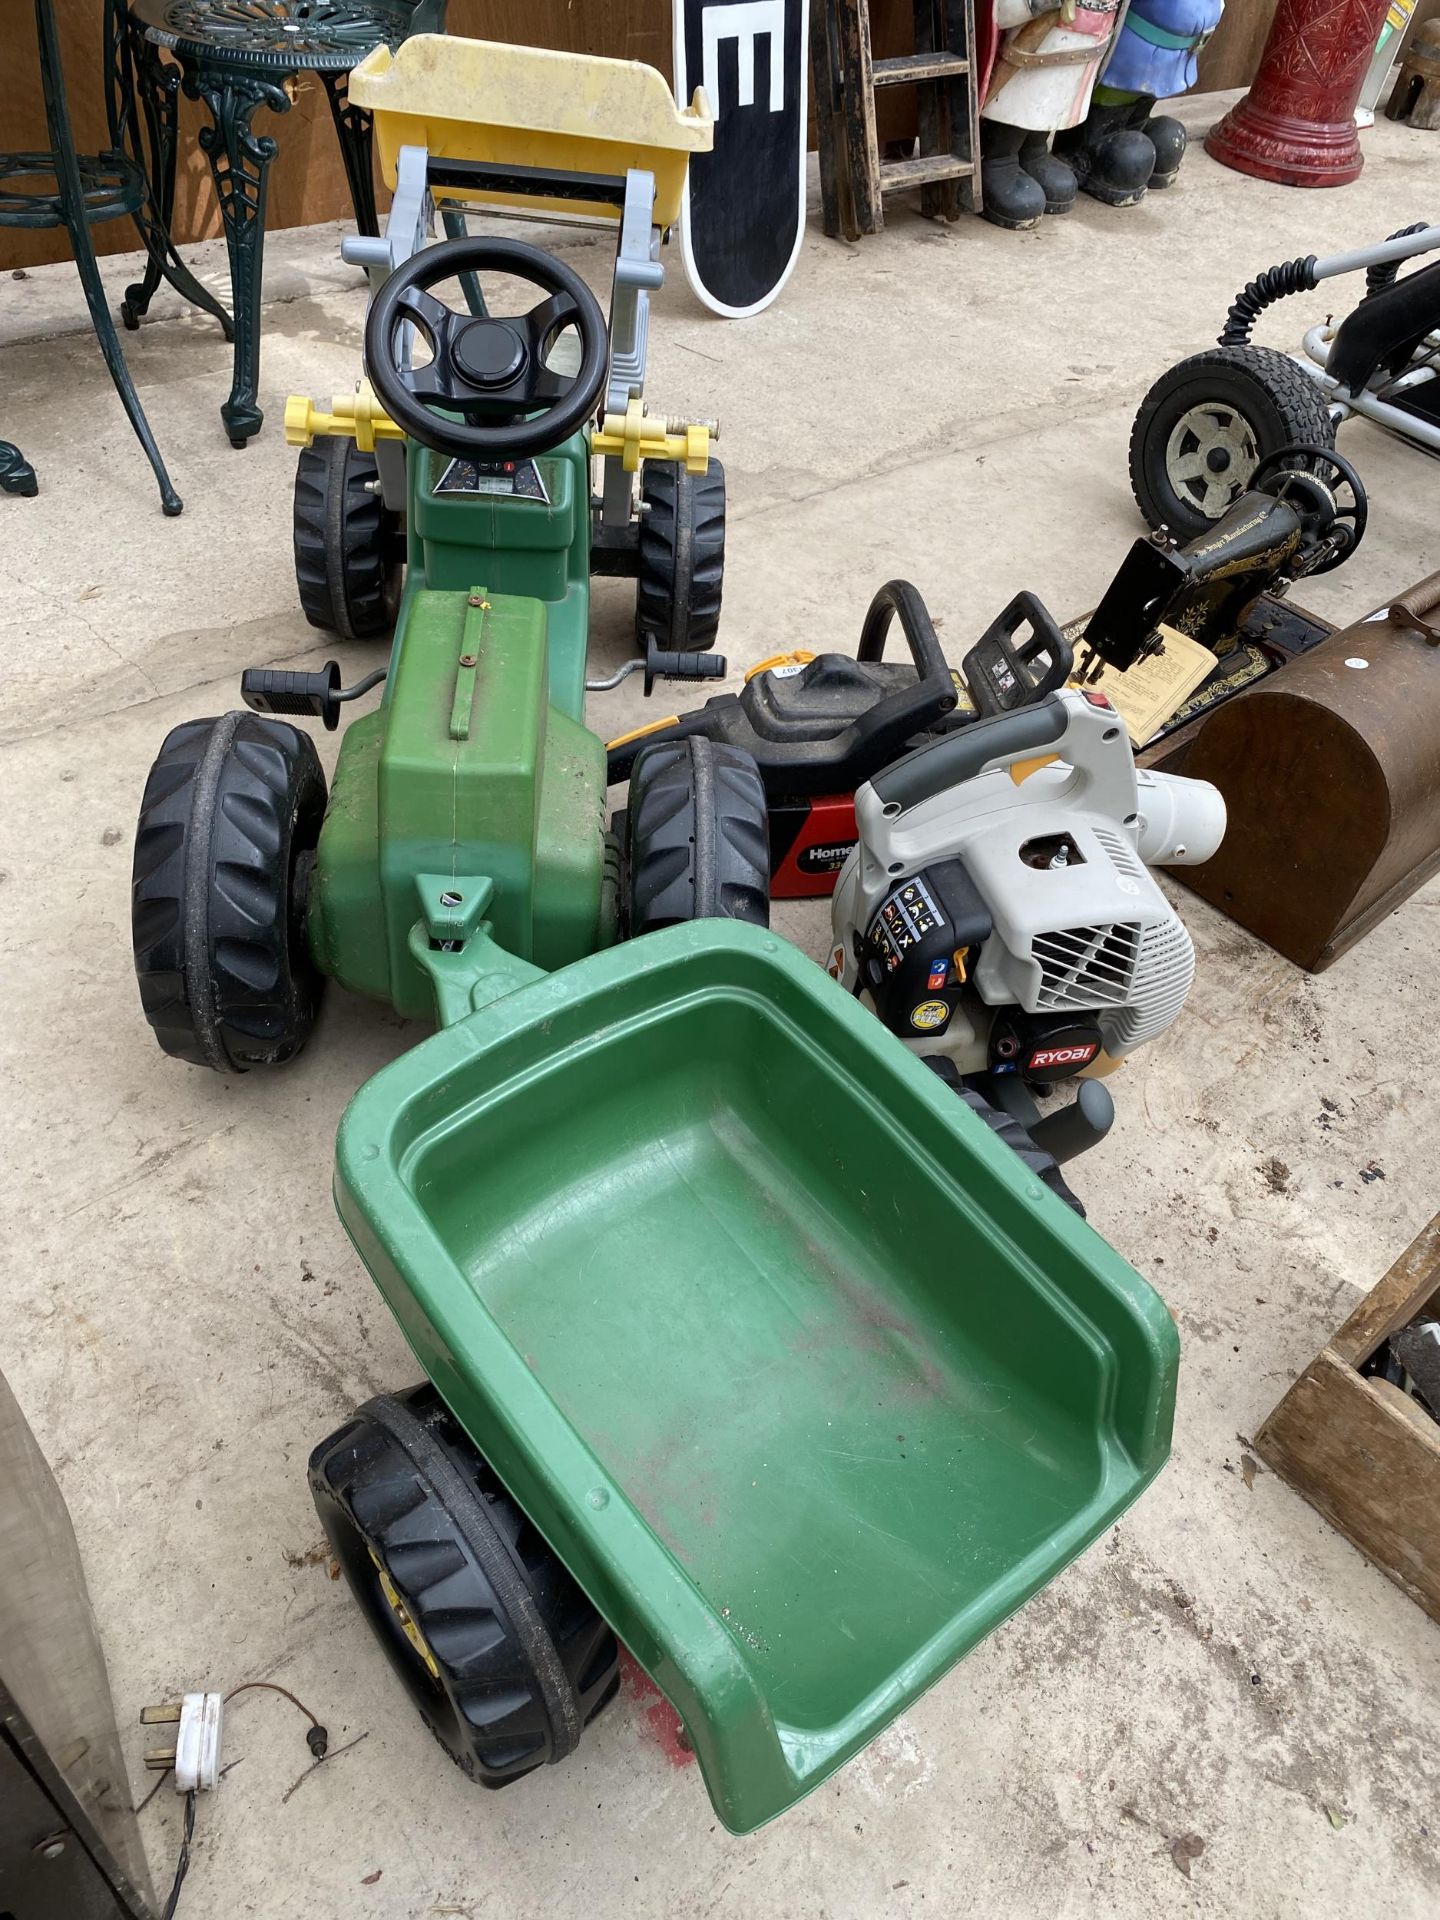 A PLASTIC JOHN DEERE PEDAL TRACTOR WITH TRAILER - Image 4 of 6